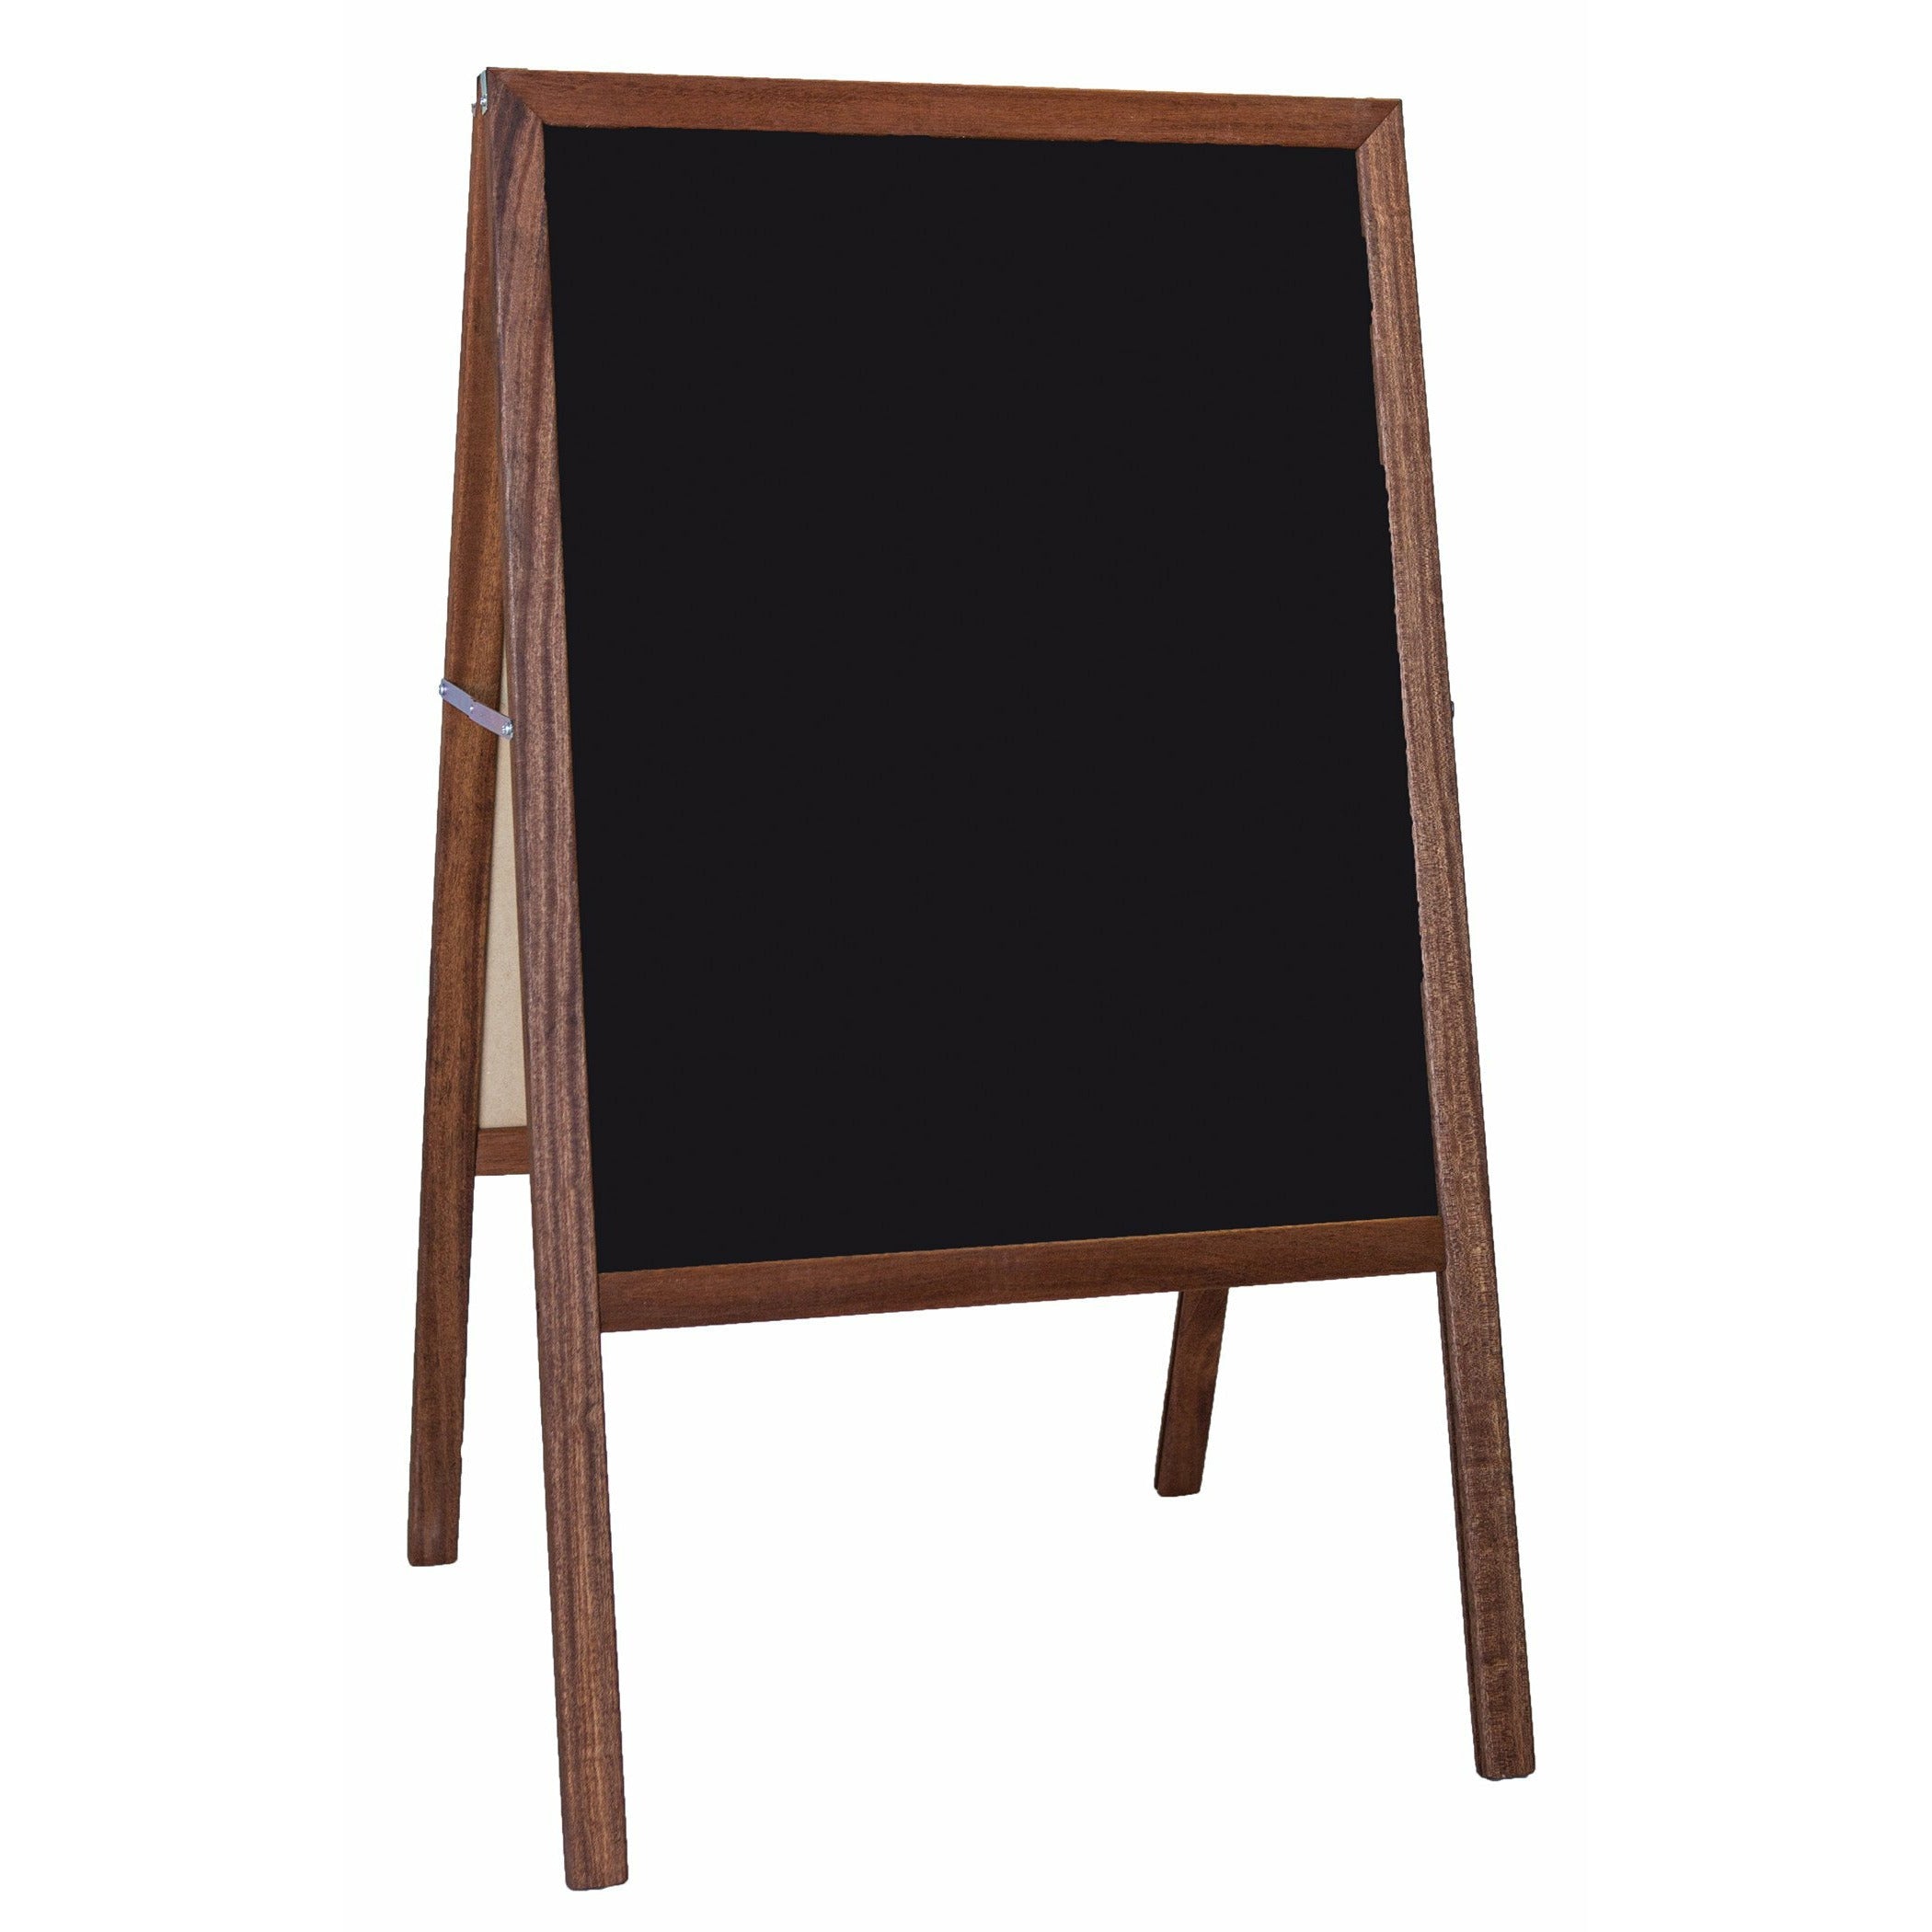 Chalkboard Marquee Easel, Black both sides, Stained